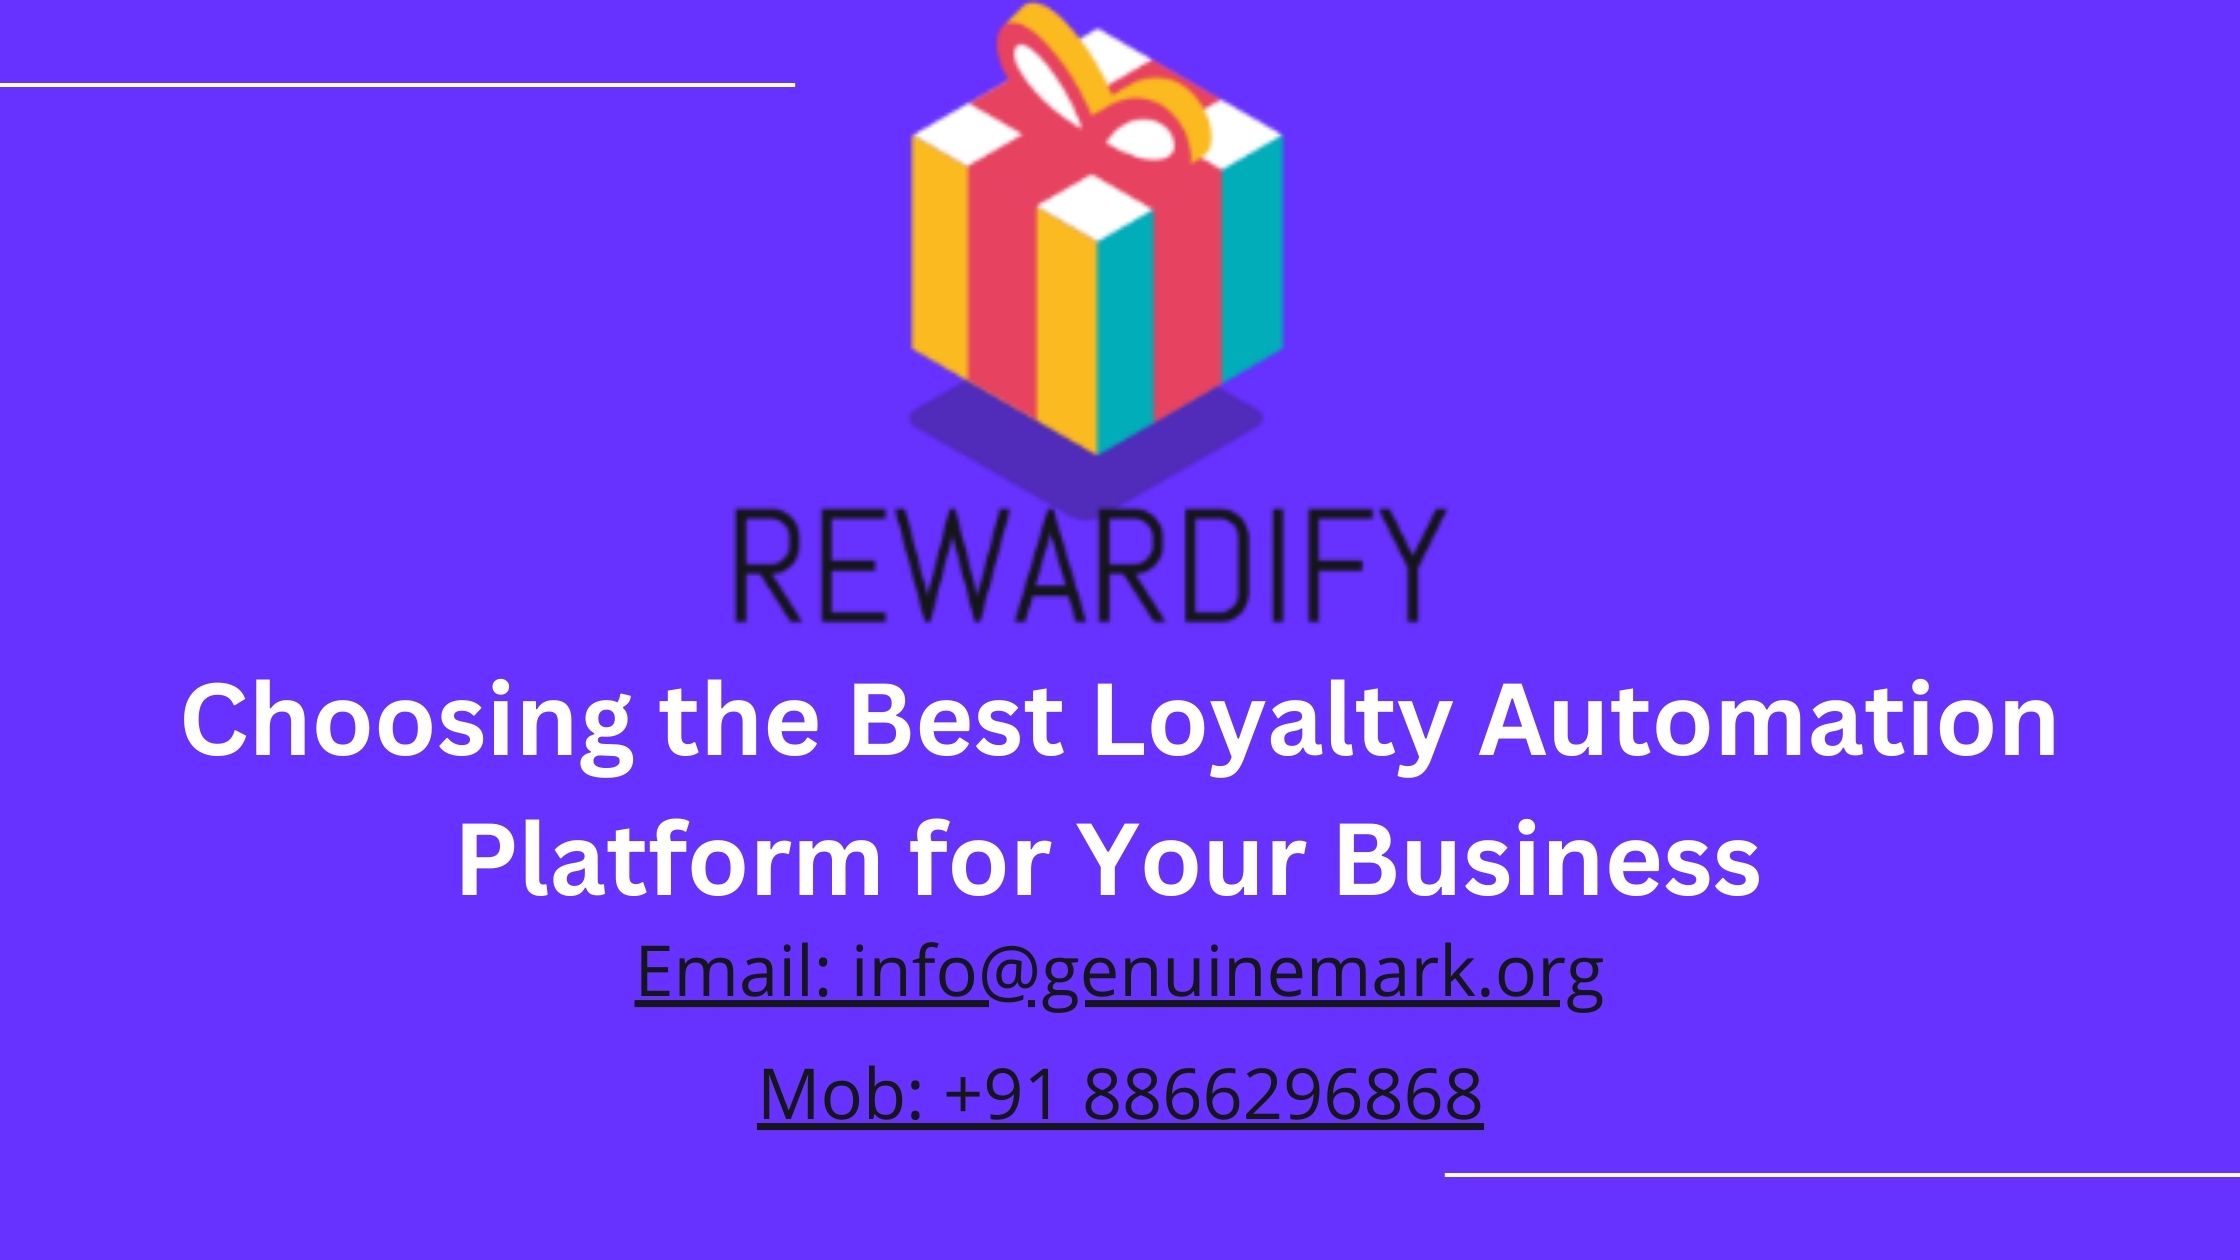 Choosing the Best Loyalty Automation Platform for Your Business – Anti-Counterfeiting | Loyalty Platform | Influencer Loyalty | Digital Warranty | Supply Chain Traceability